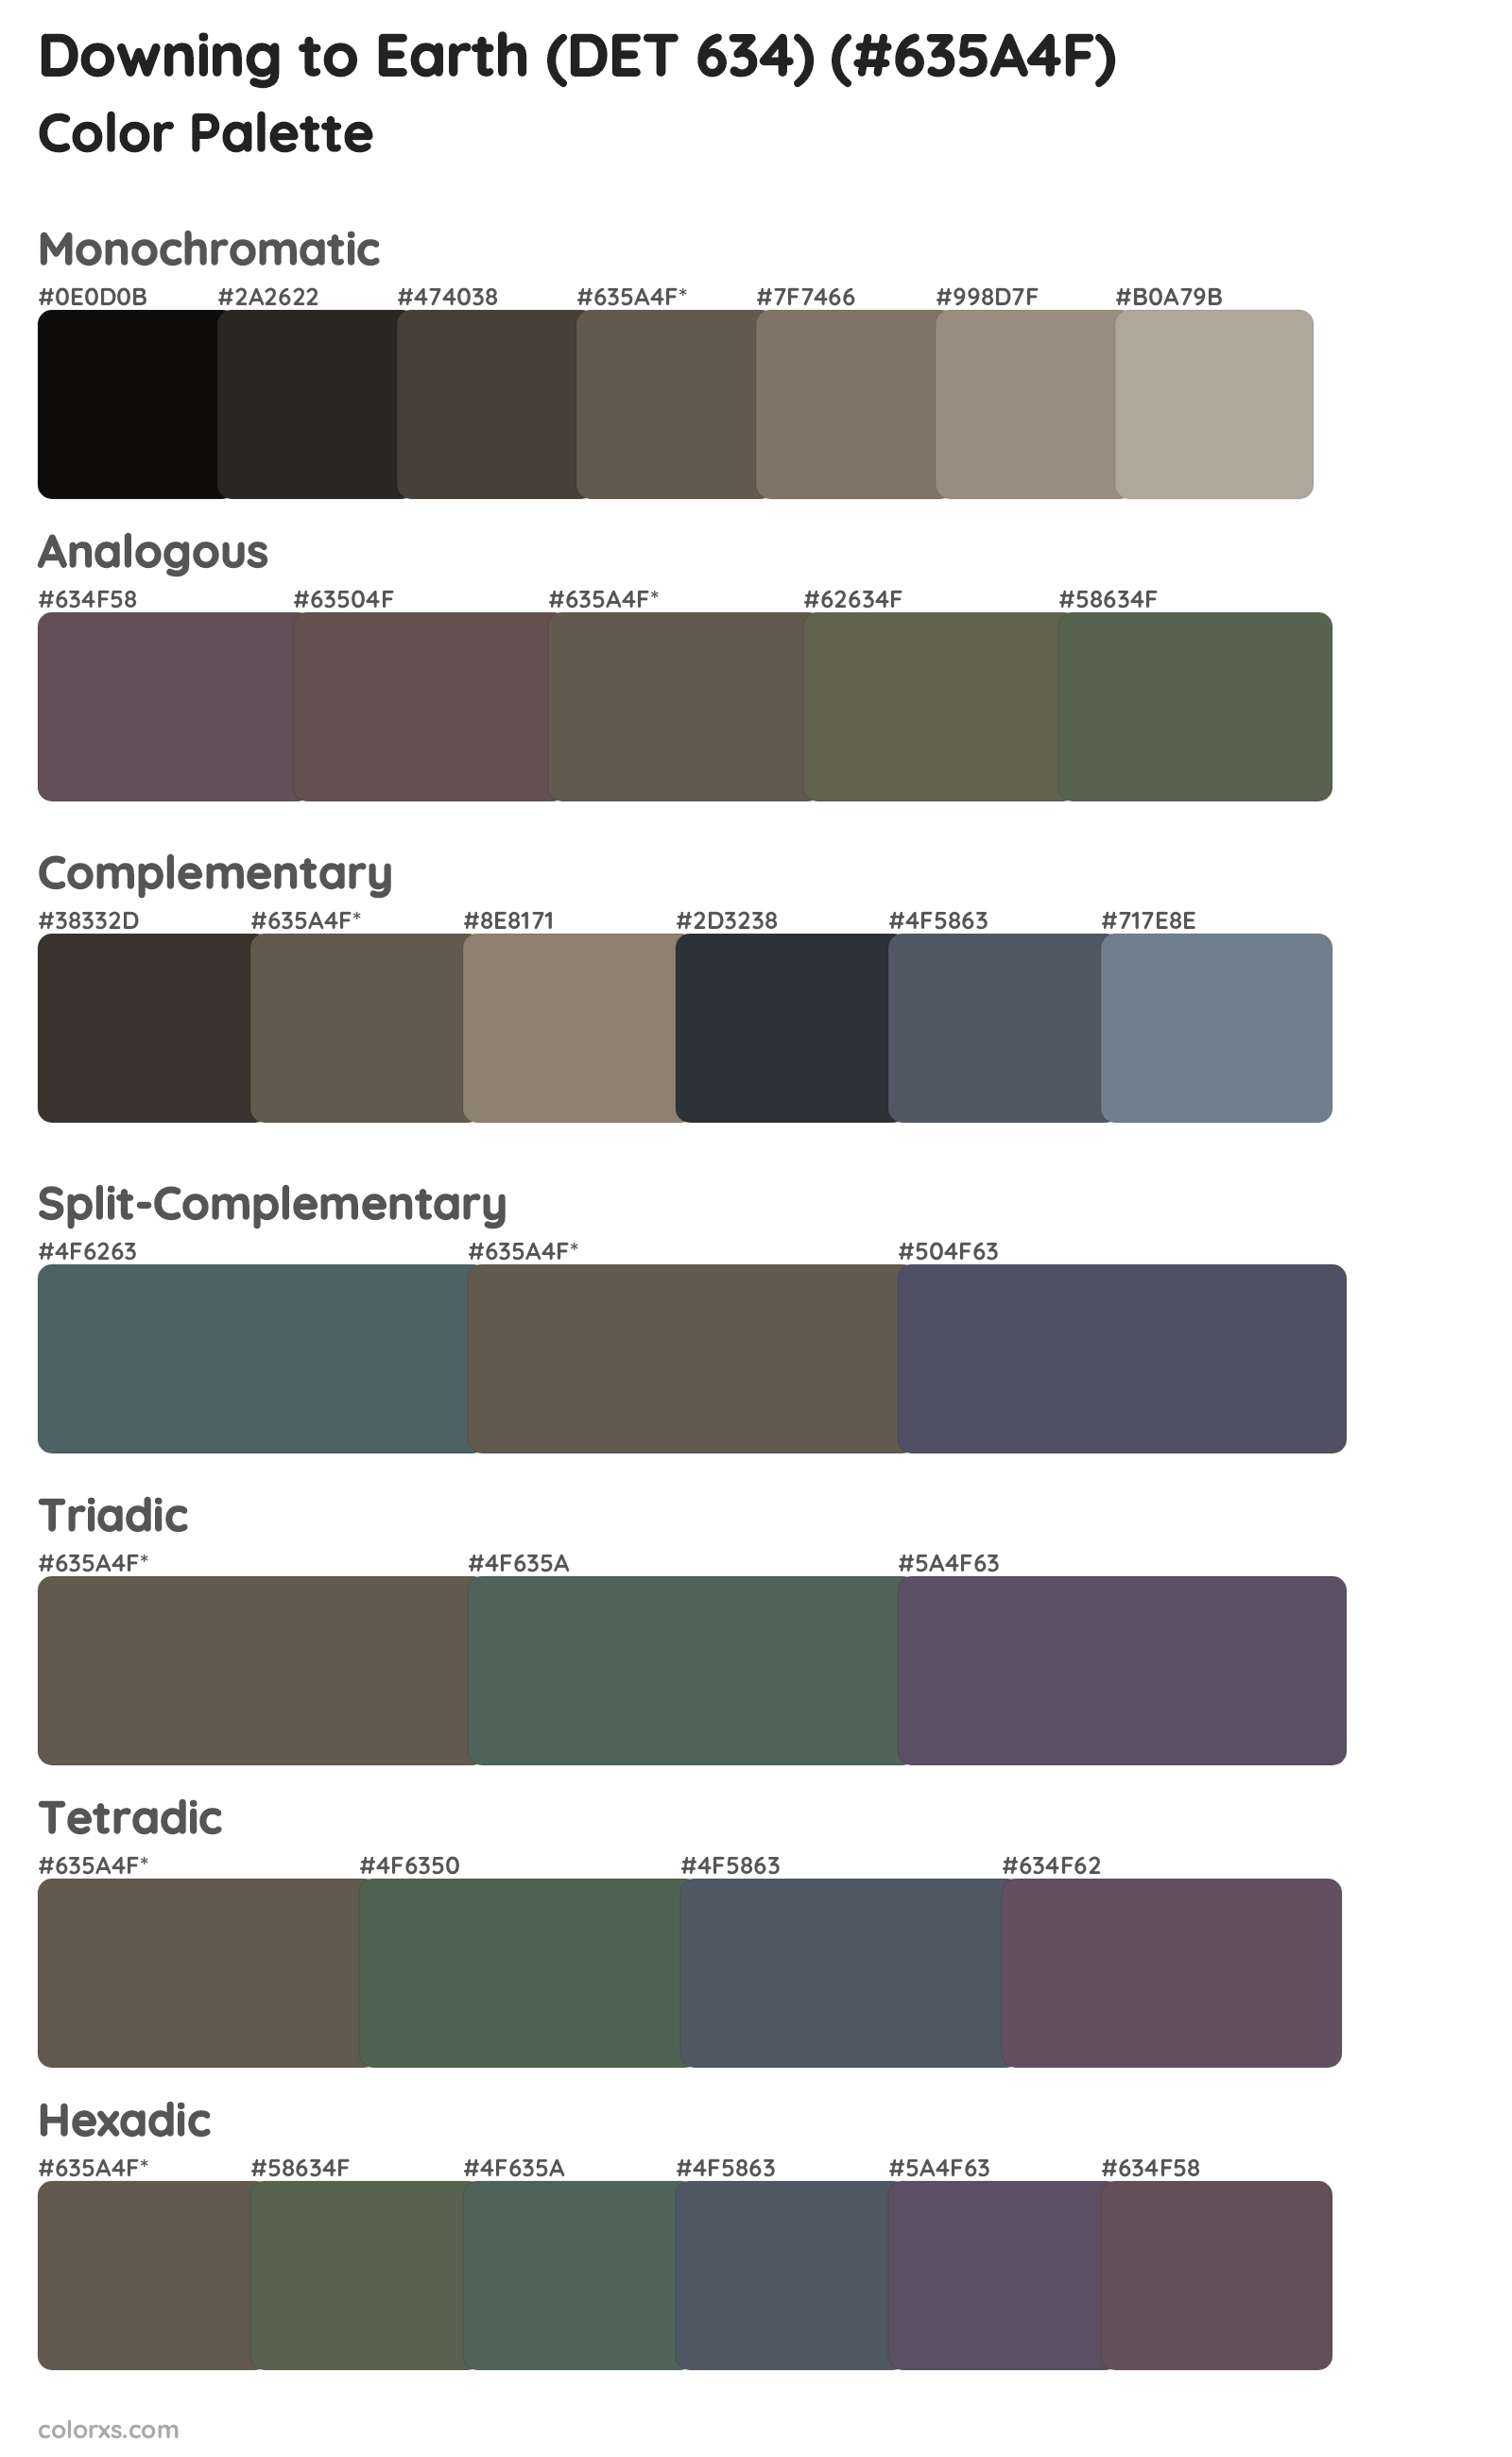 Downing to Earth (DET 634) Color Scheme Palettes